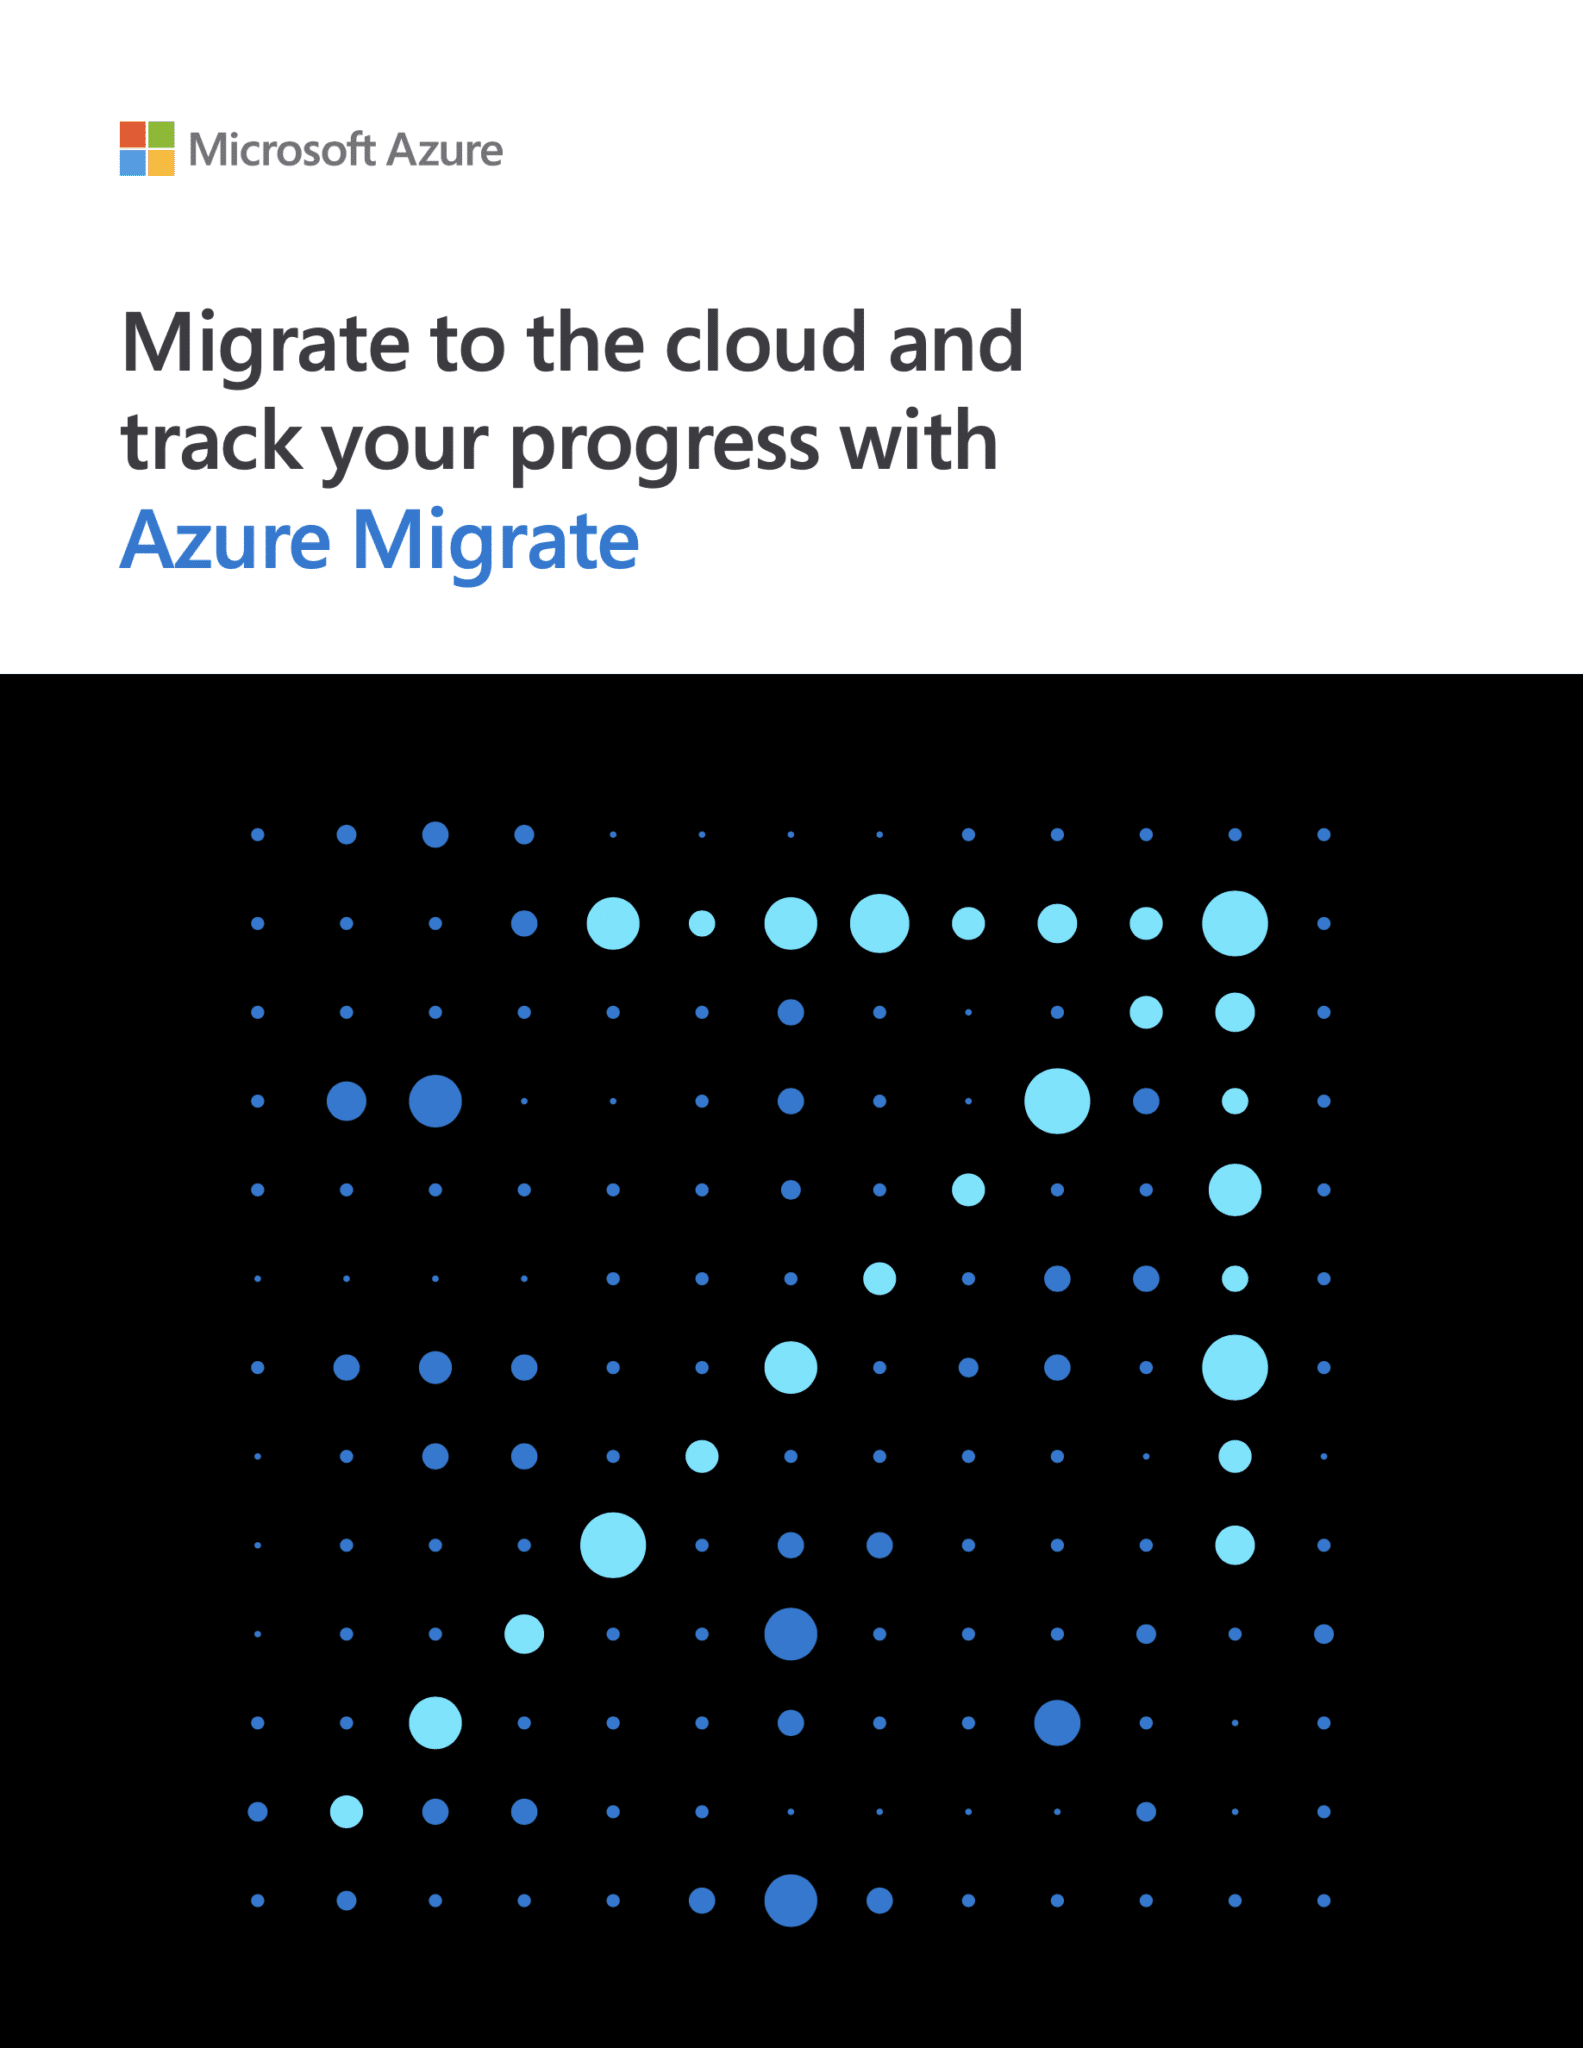 Migrate to the cloud and track your progress with Azure Migrate 1